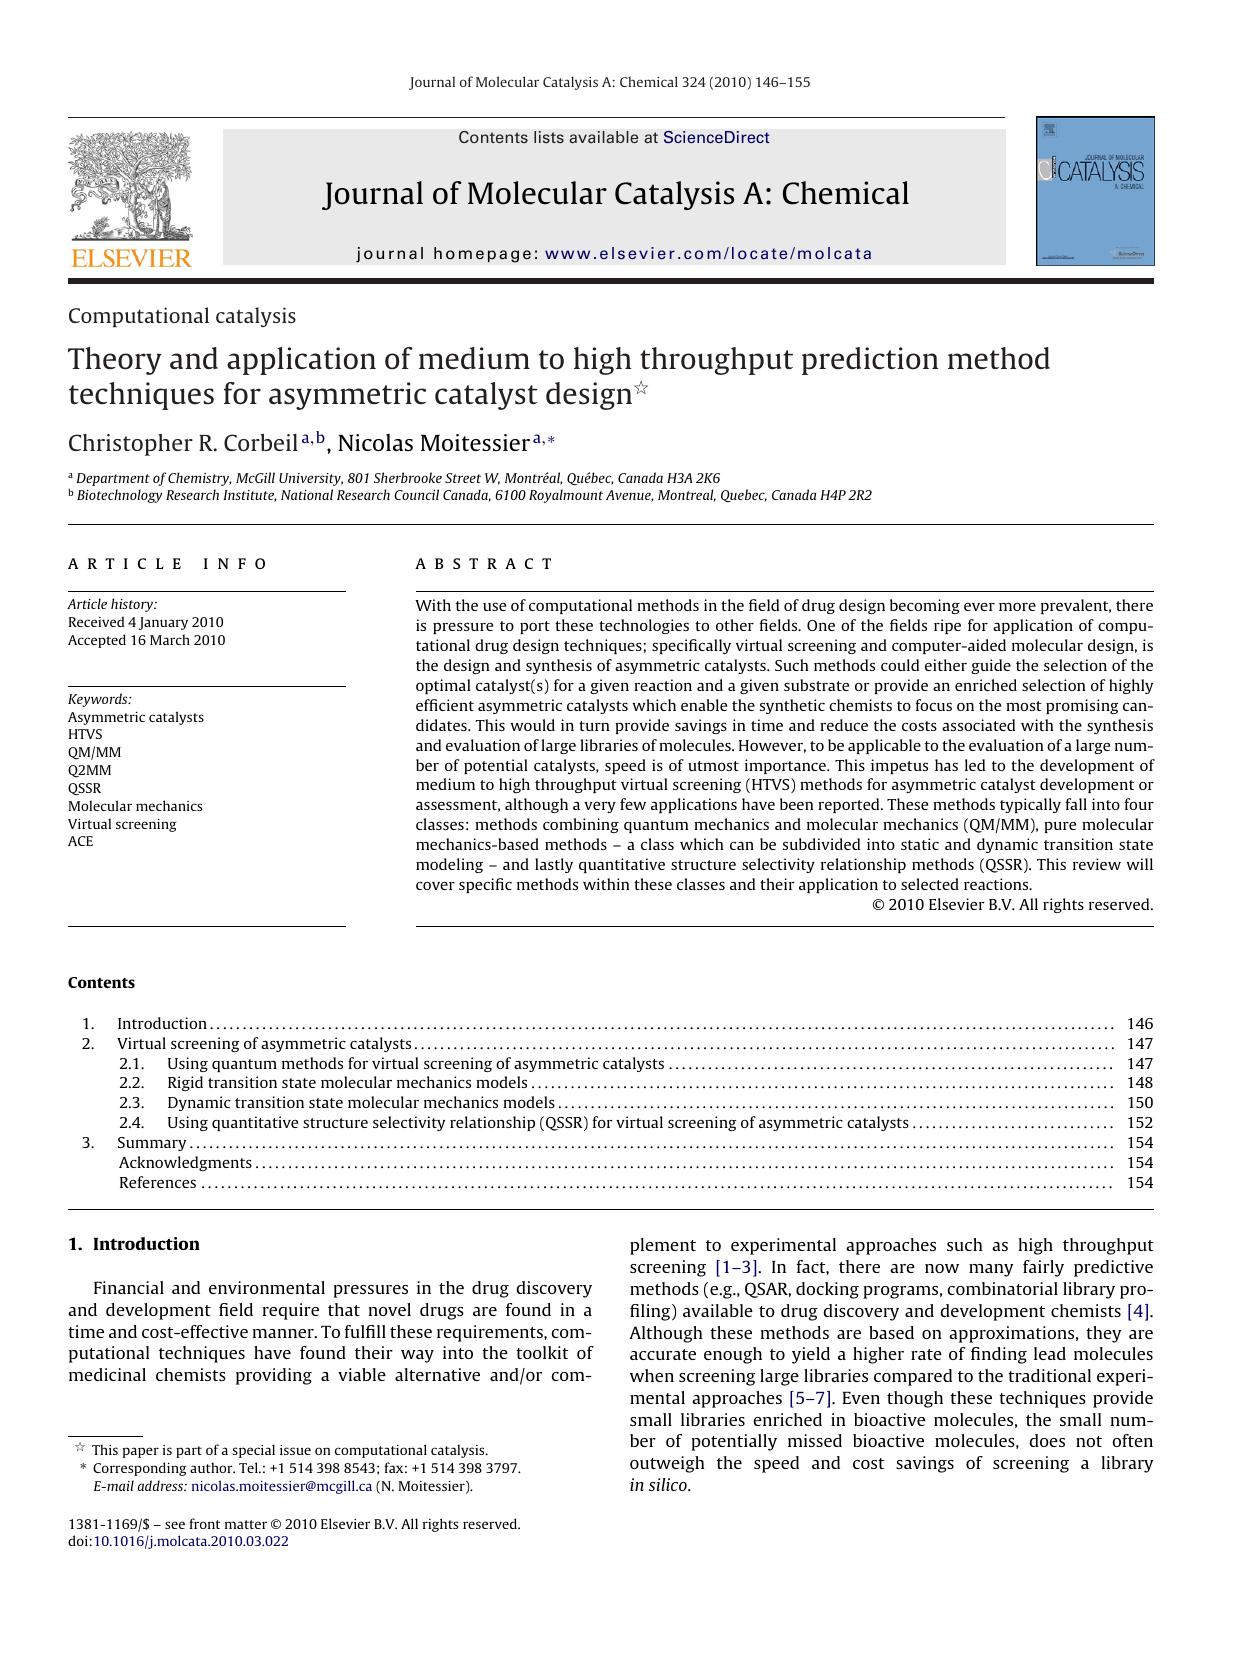 Theory and application of medium to high throughput prediction method techniques for asymmetric catalyst design by Christopher R. Corbeil; Nicolas Moitessier